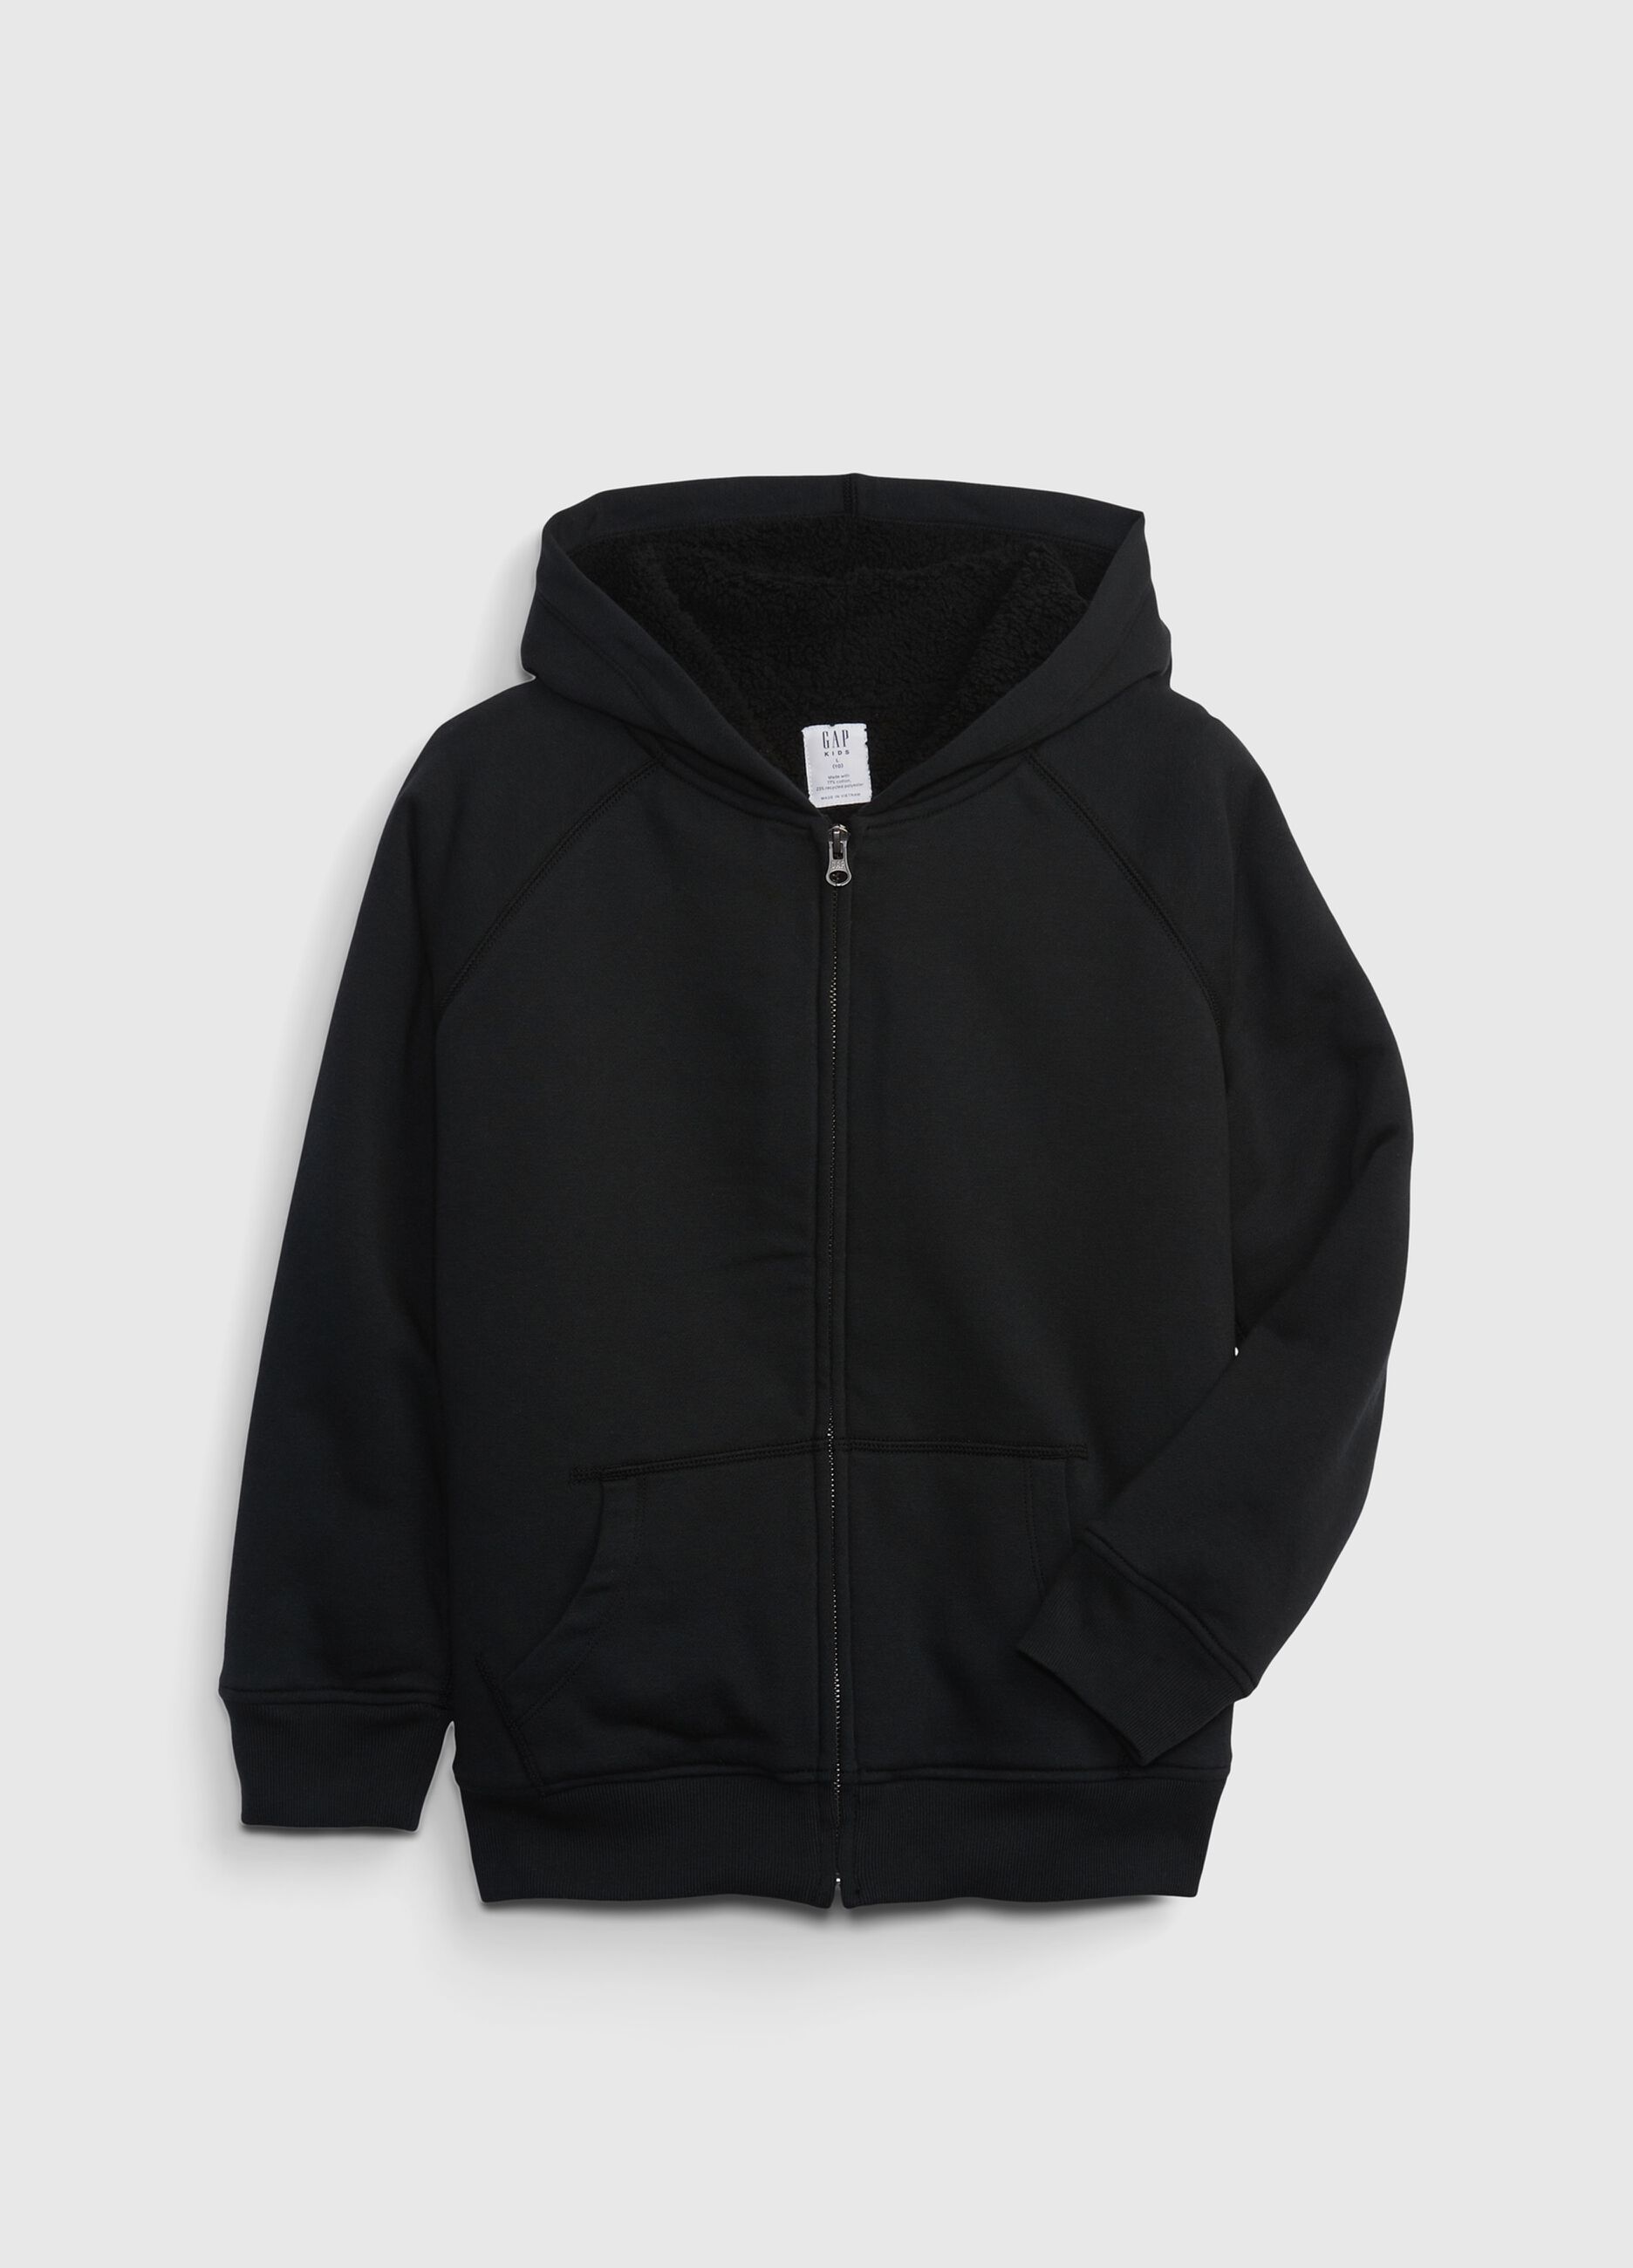 Full-zip with sherpa hood and lining